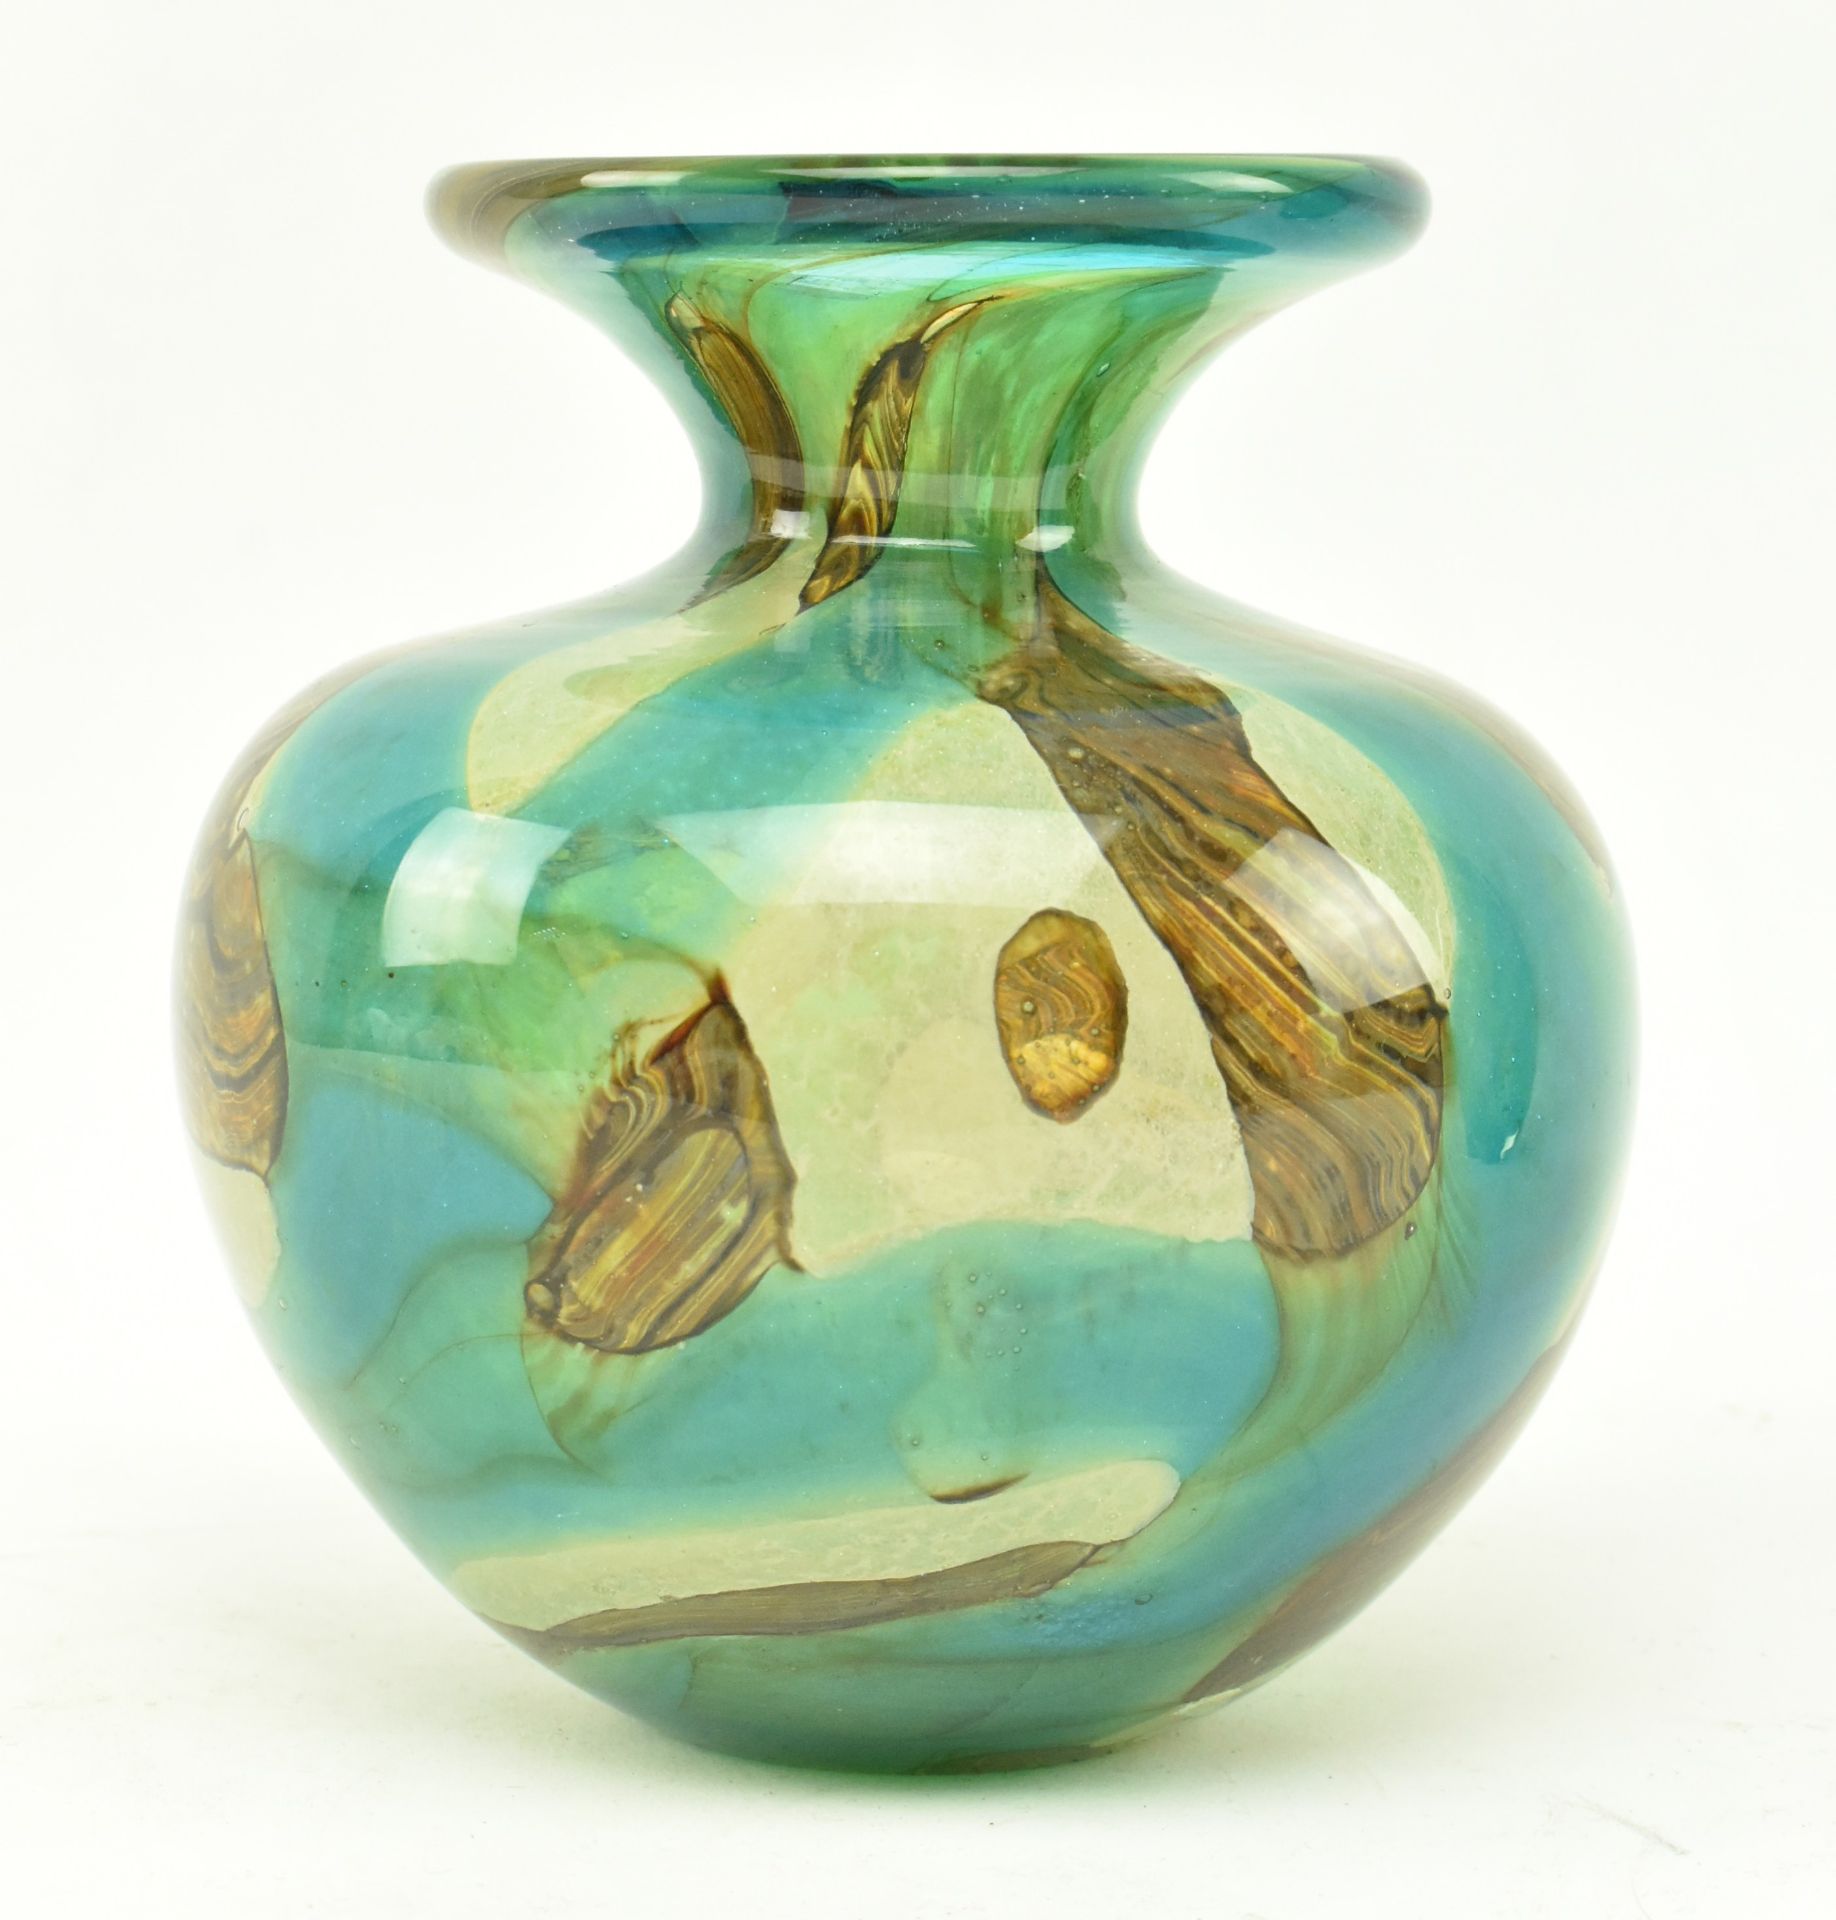 MDINA - TWO TIGER PATTERN POLYCHROME GLASS VASES - Image 2 of 8